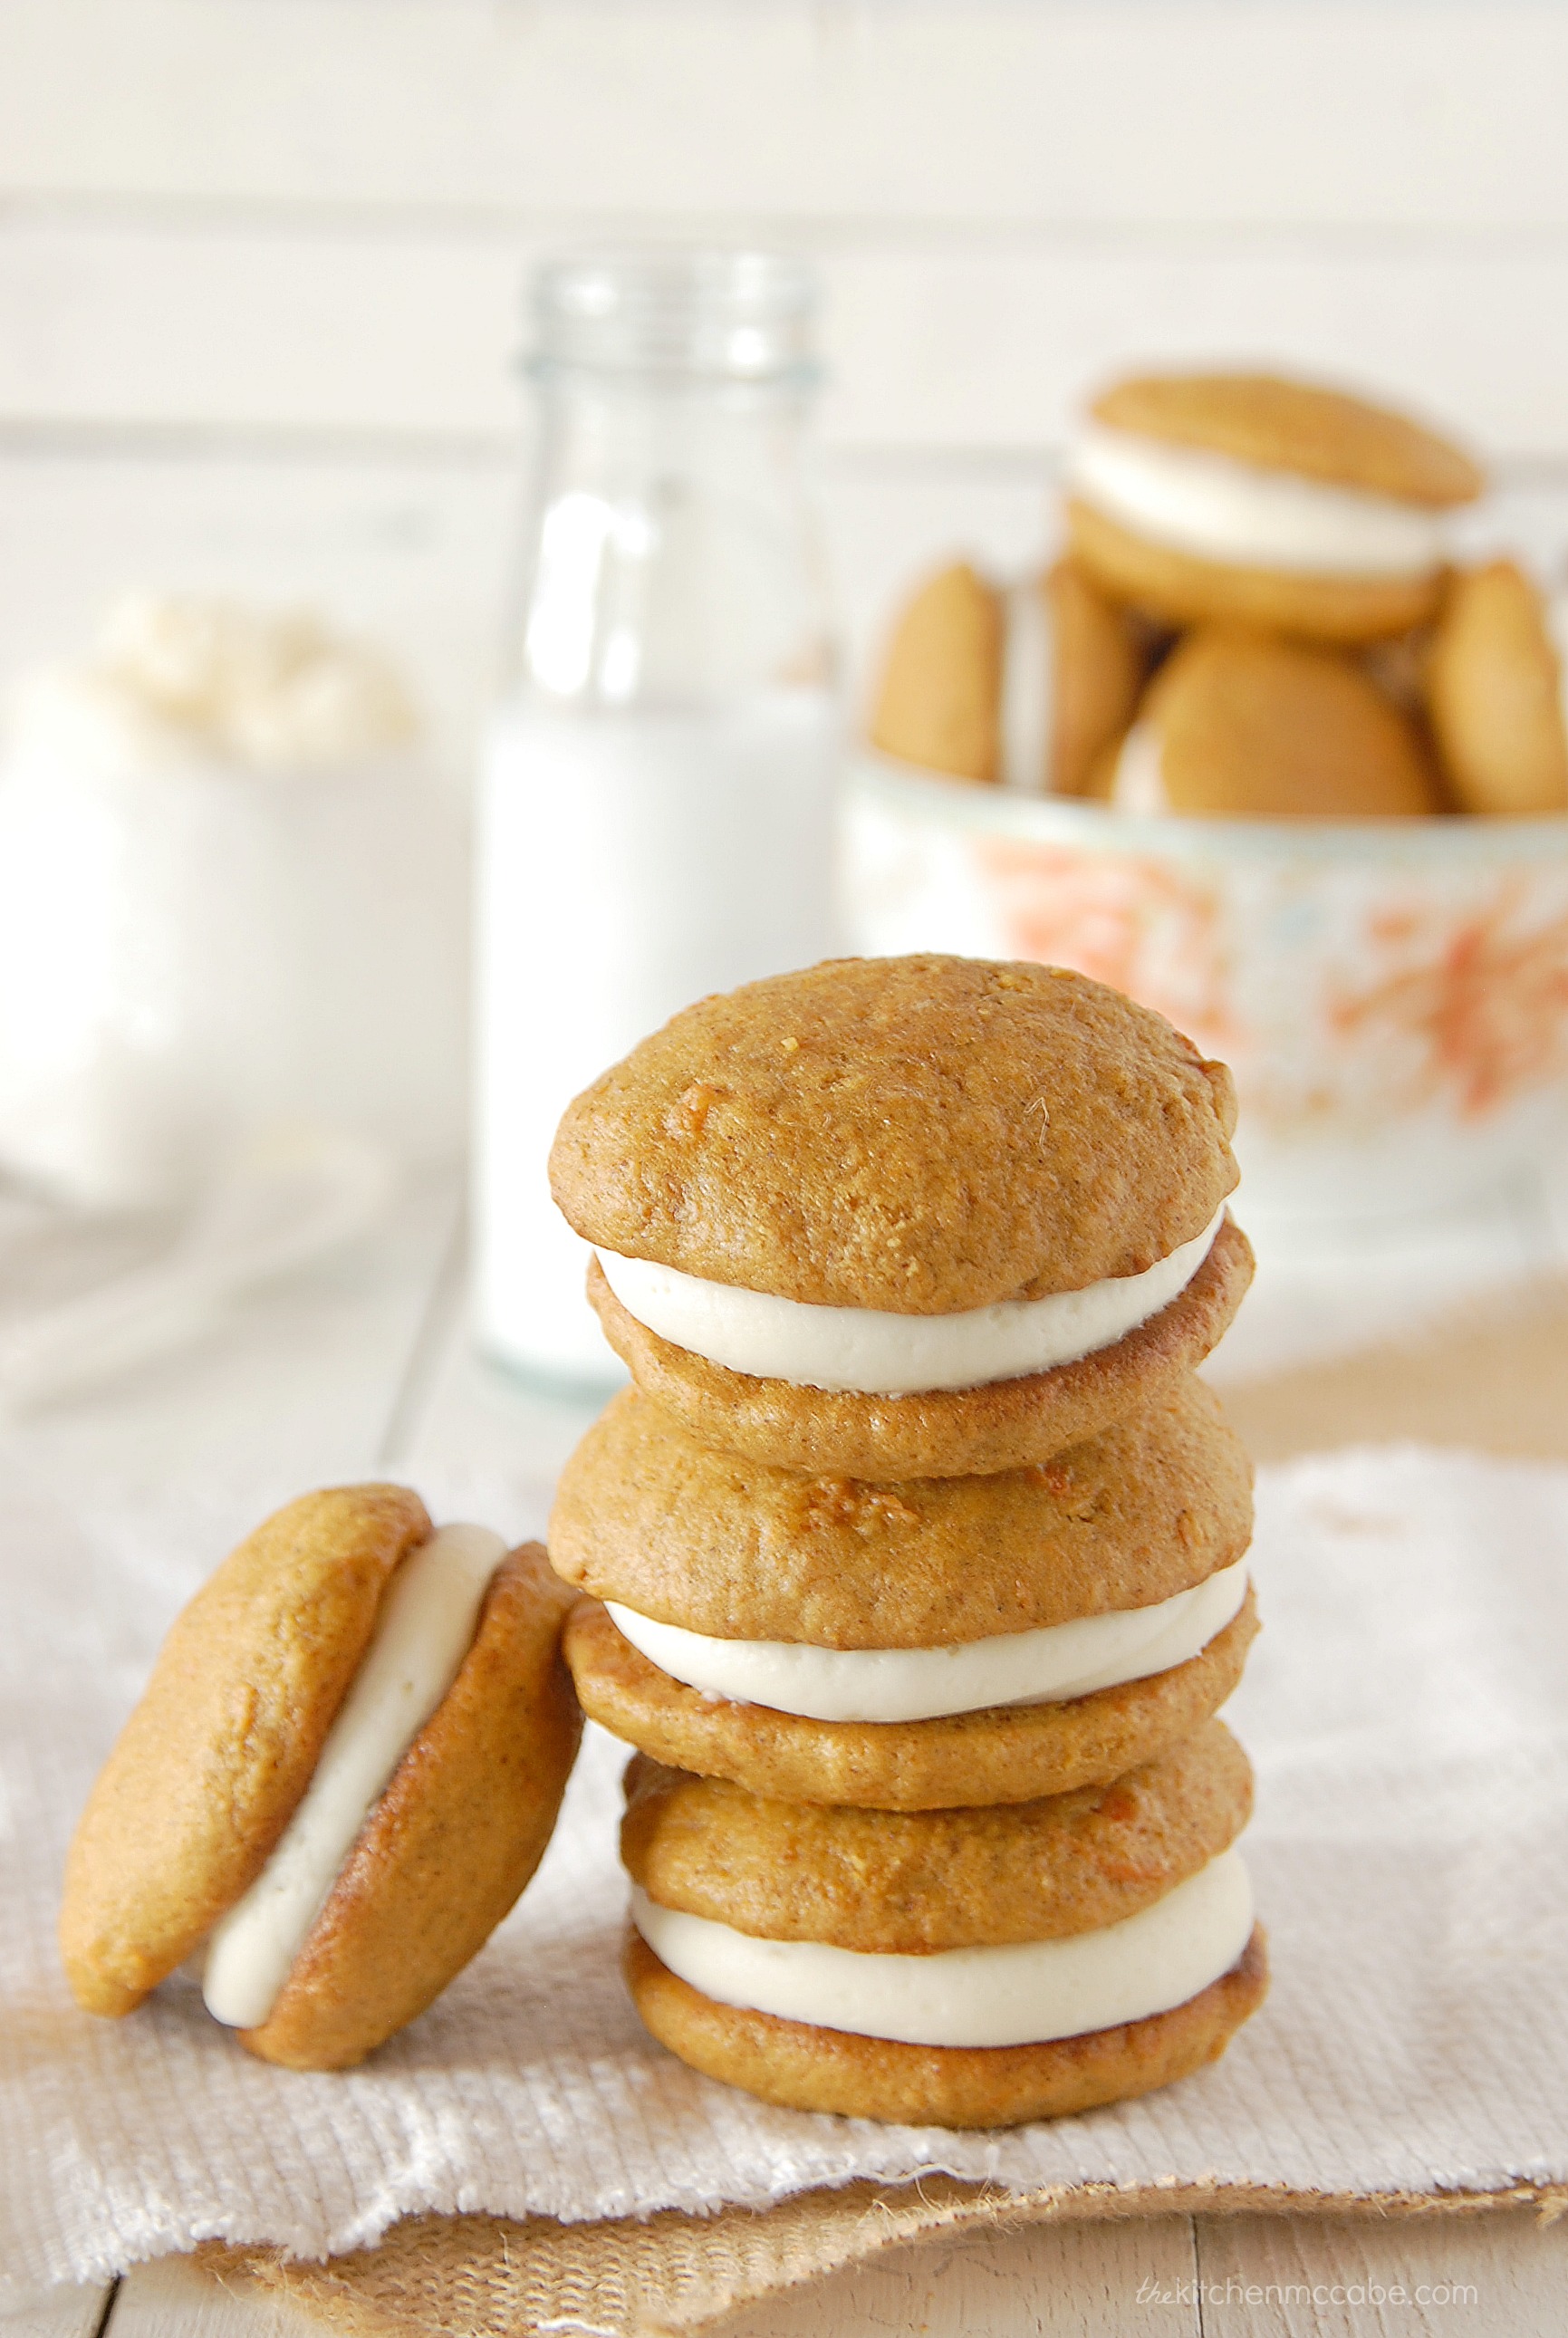 https://www.thekitchenmccabe.com/wp-content/uploads/2014/02/carrot-cake-whoopie-pie-with-almond-cream-cheese-frosting-5.jpg